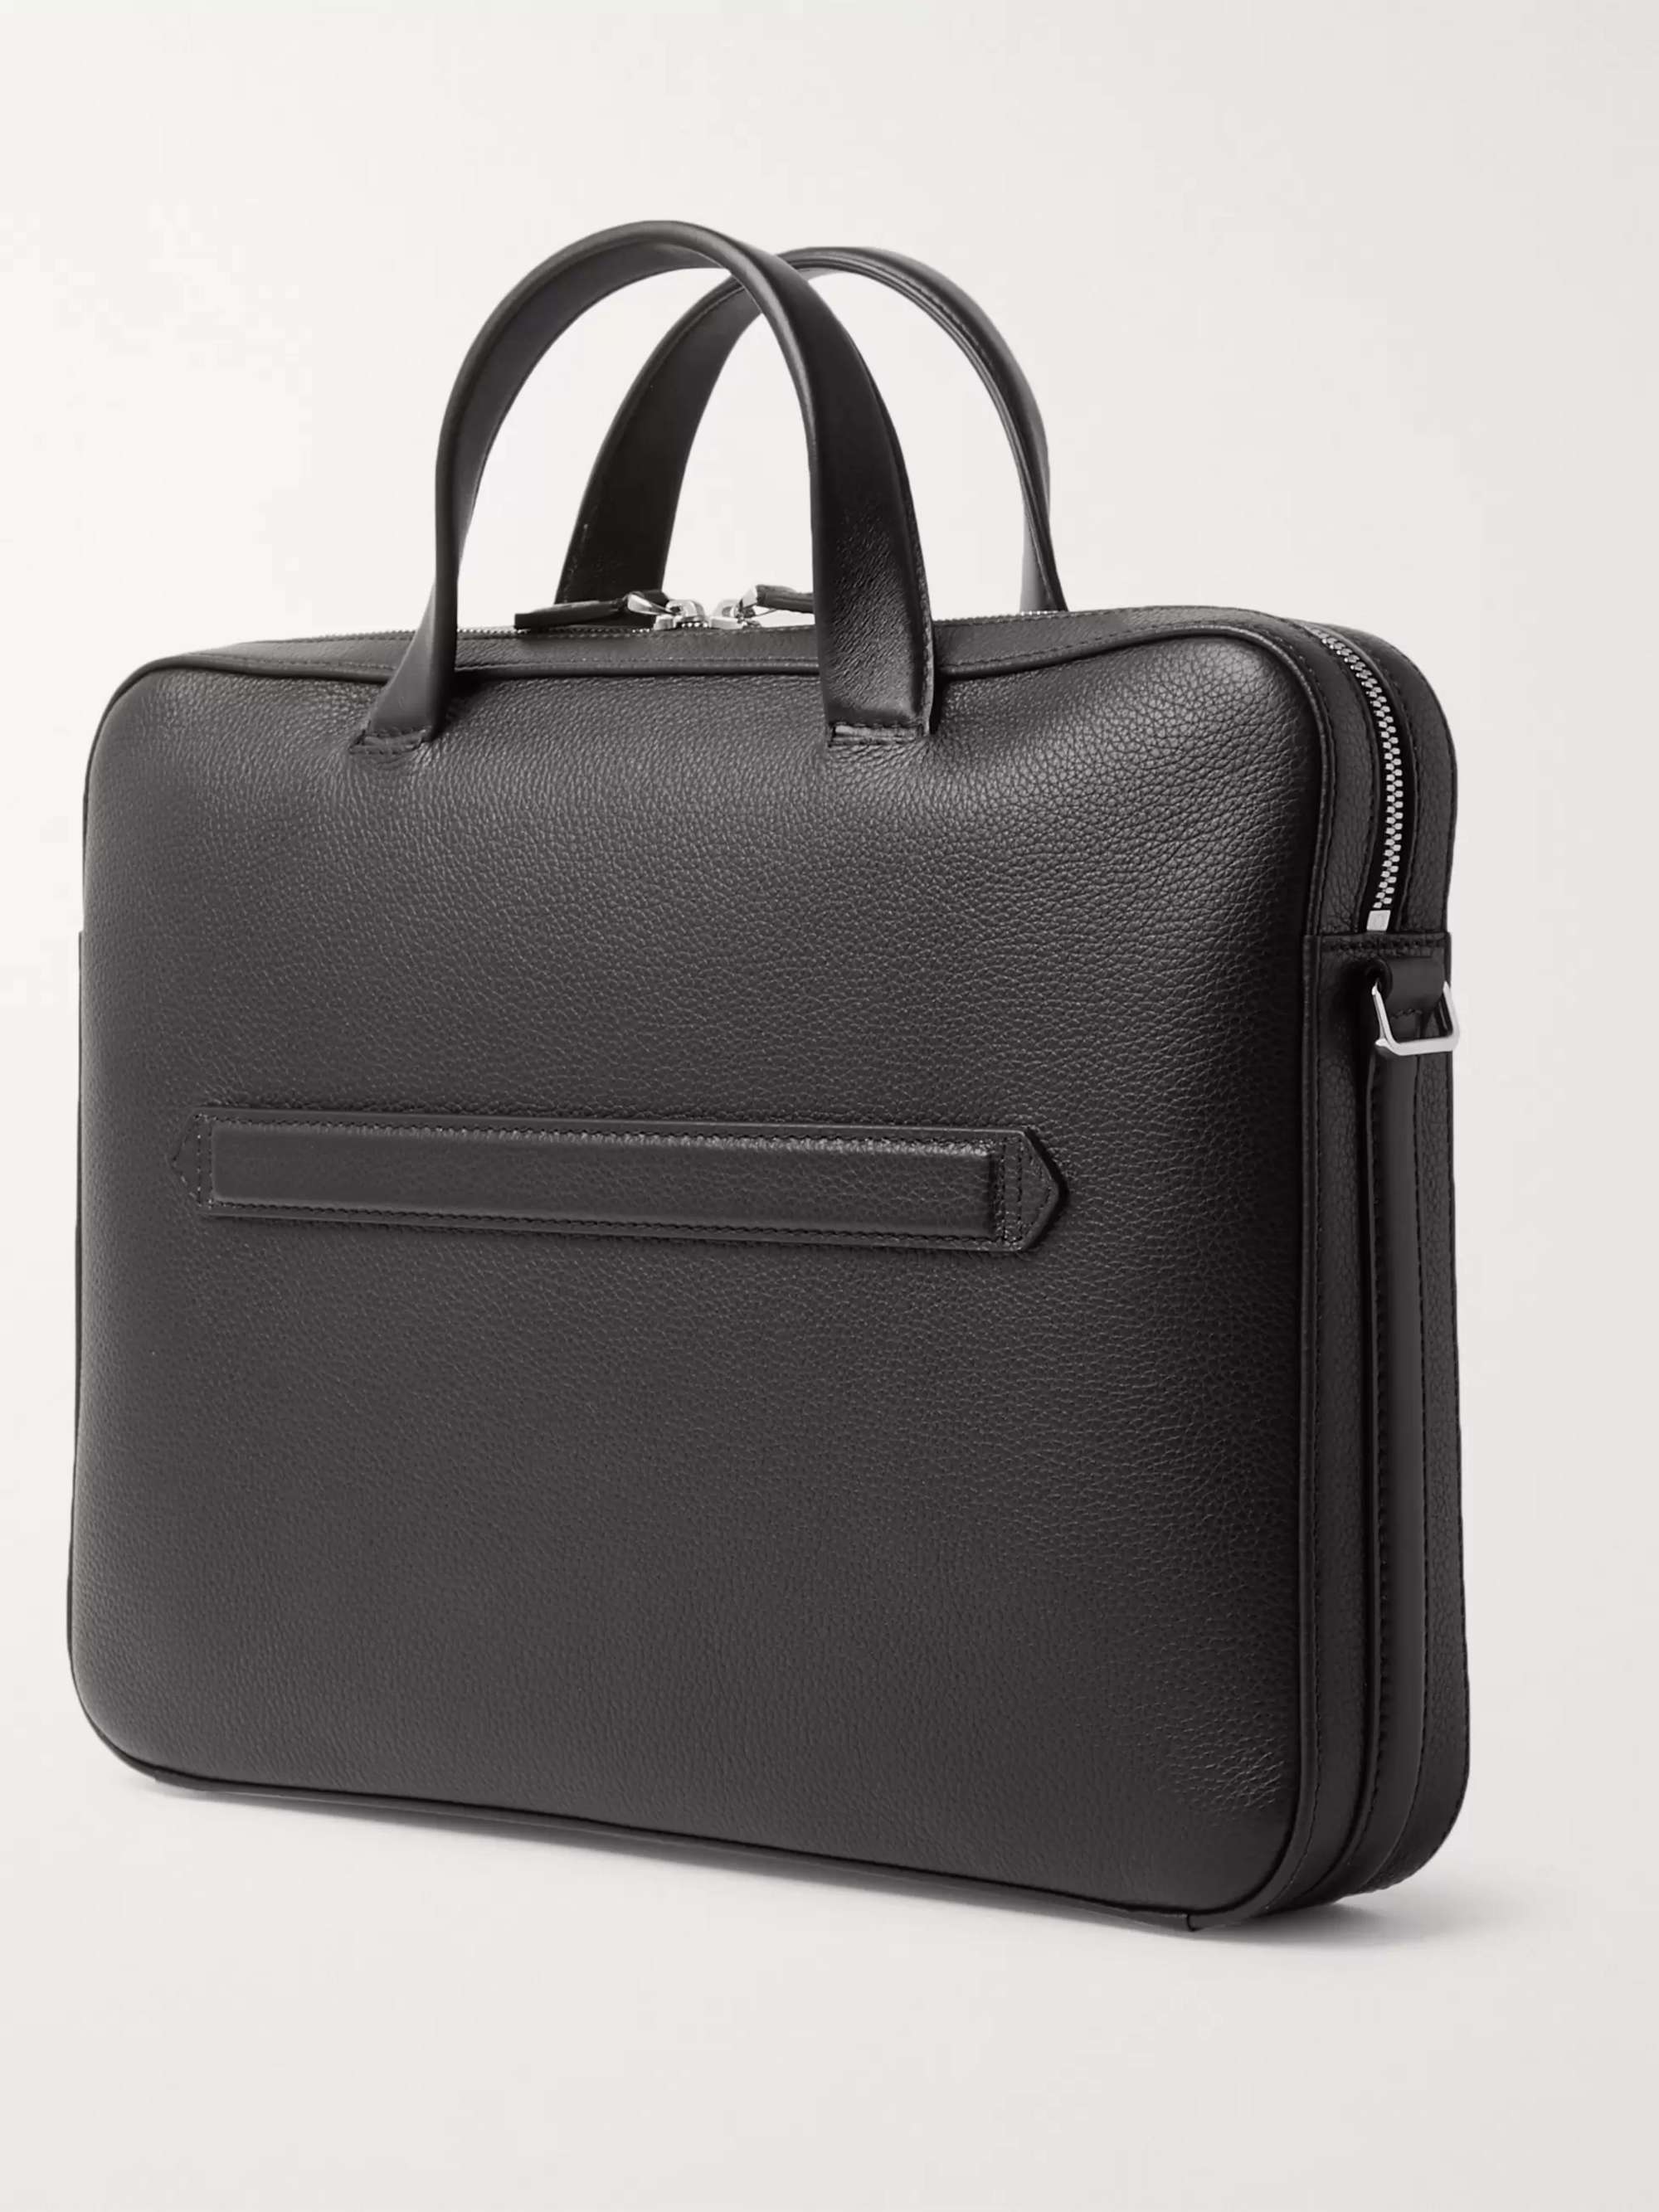 MONTBLANC Full-Grain Leather Briefcase